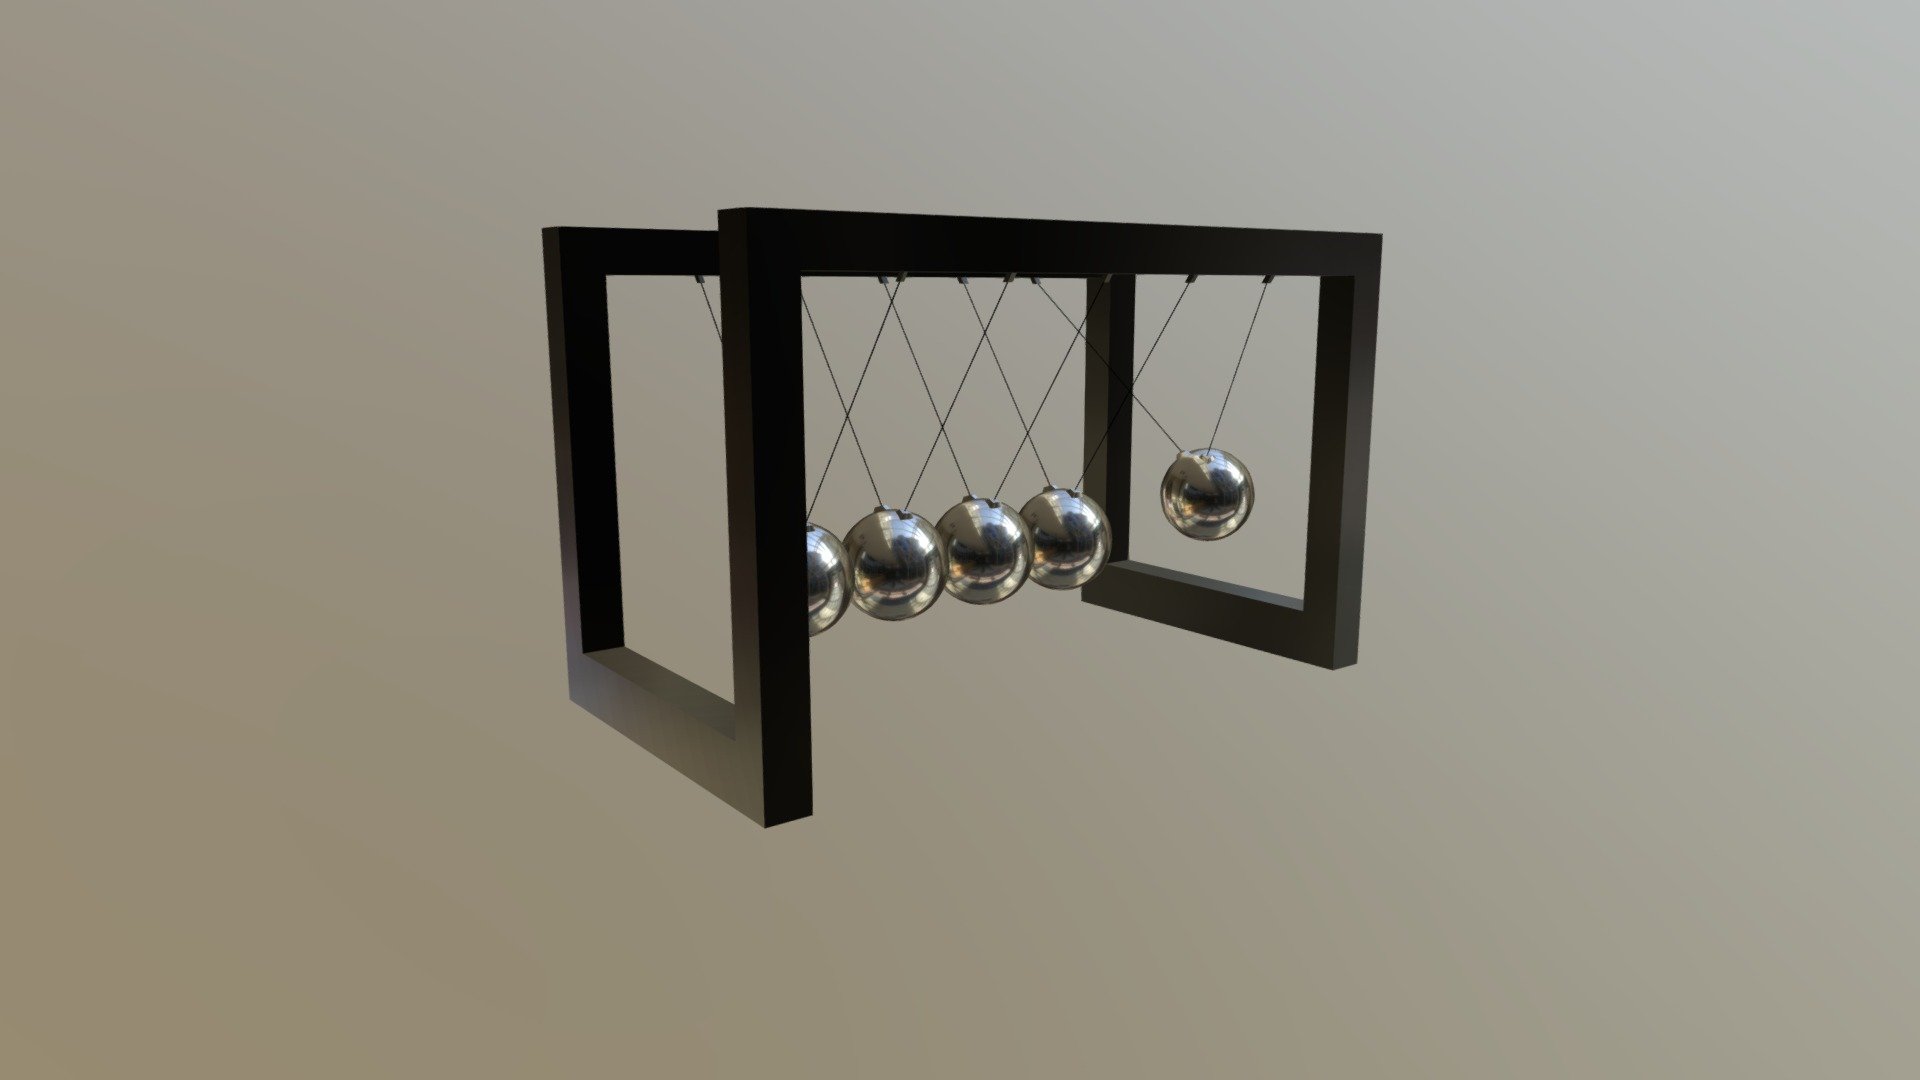 Just a little animation of a newtonian pendulum. The animation was done in maya. This model was originally created for a short movie at university. So I hope you have fun with this little asset 3d model